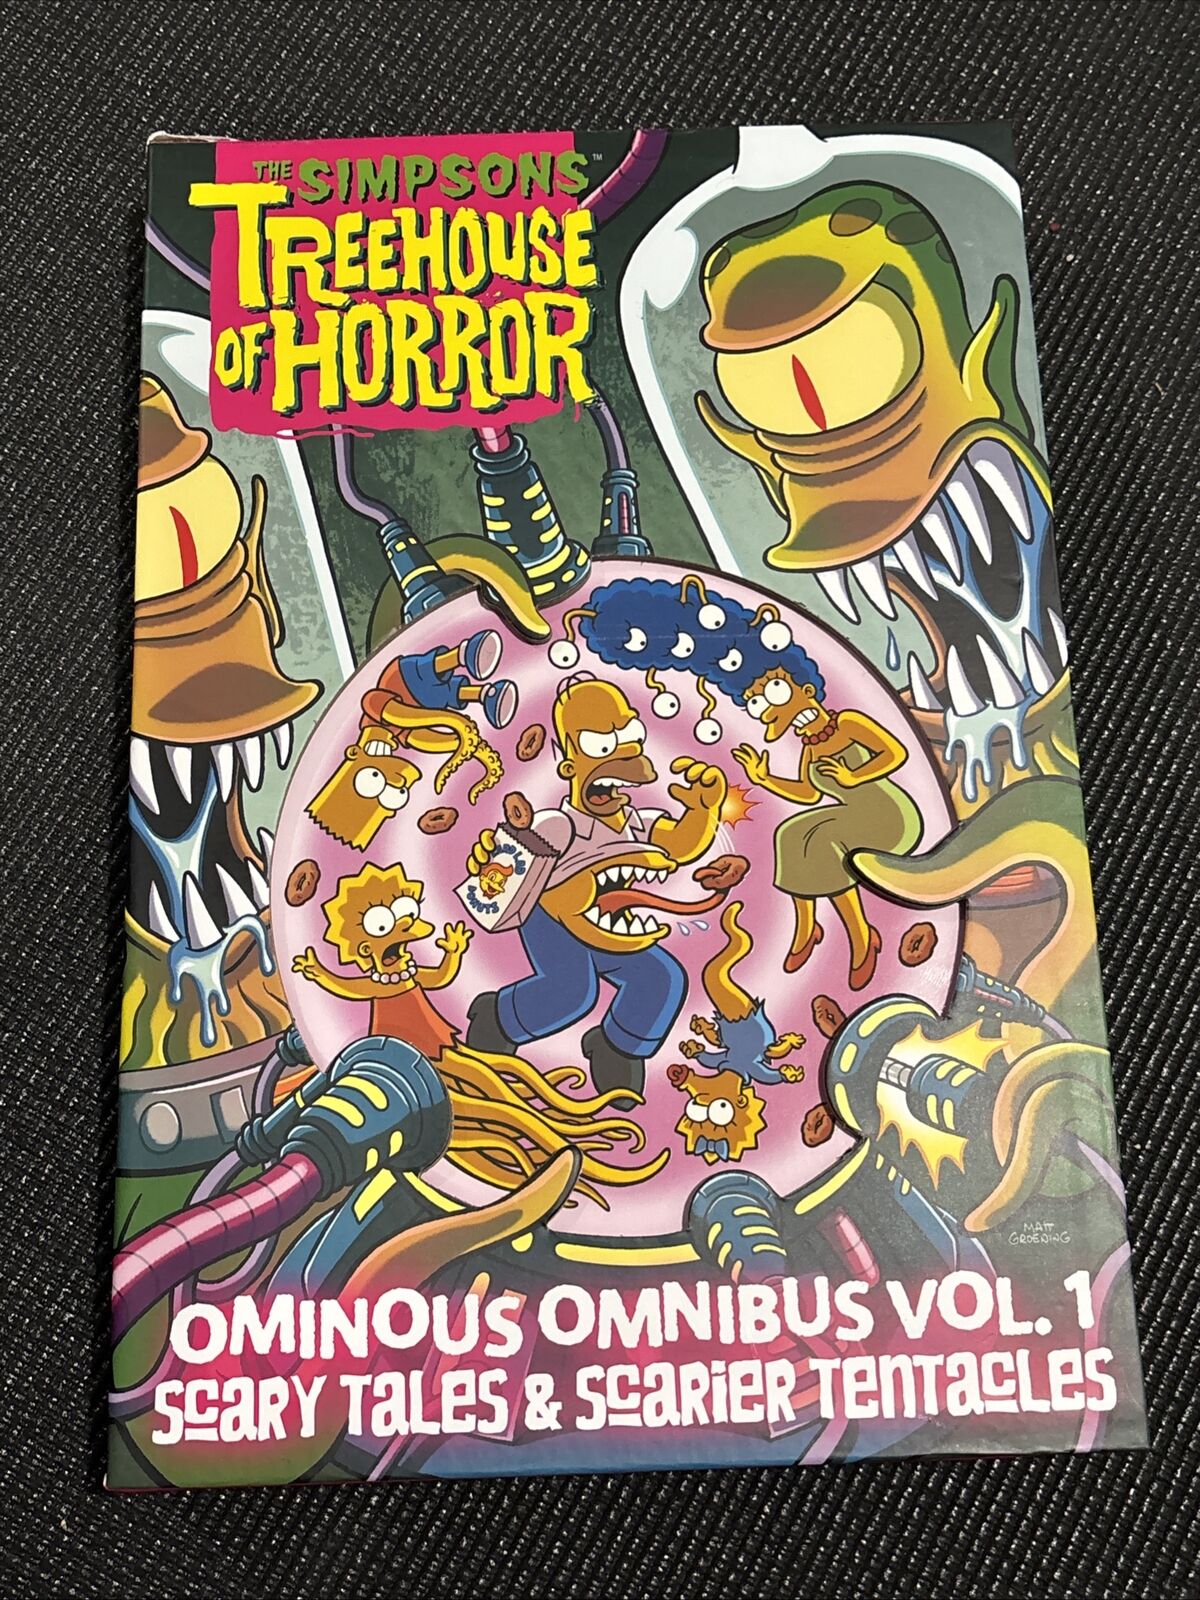 The Simpsons (Treehouse of Horror) Ominous Omnibus Vol. 1 Glow In Dark Cover